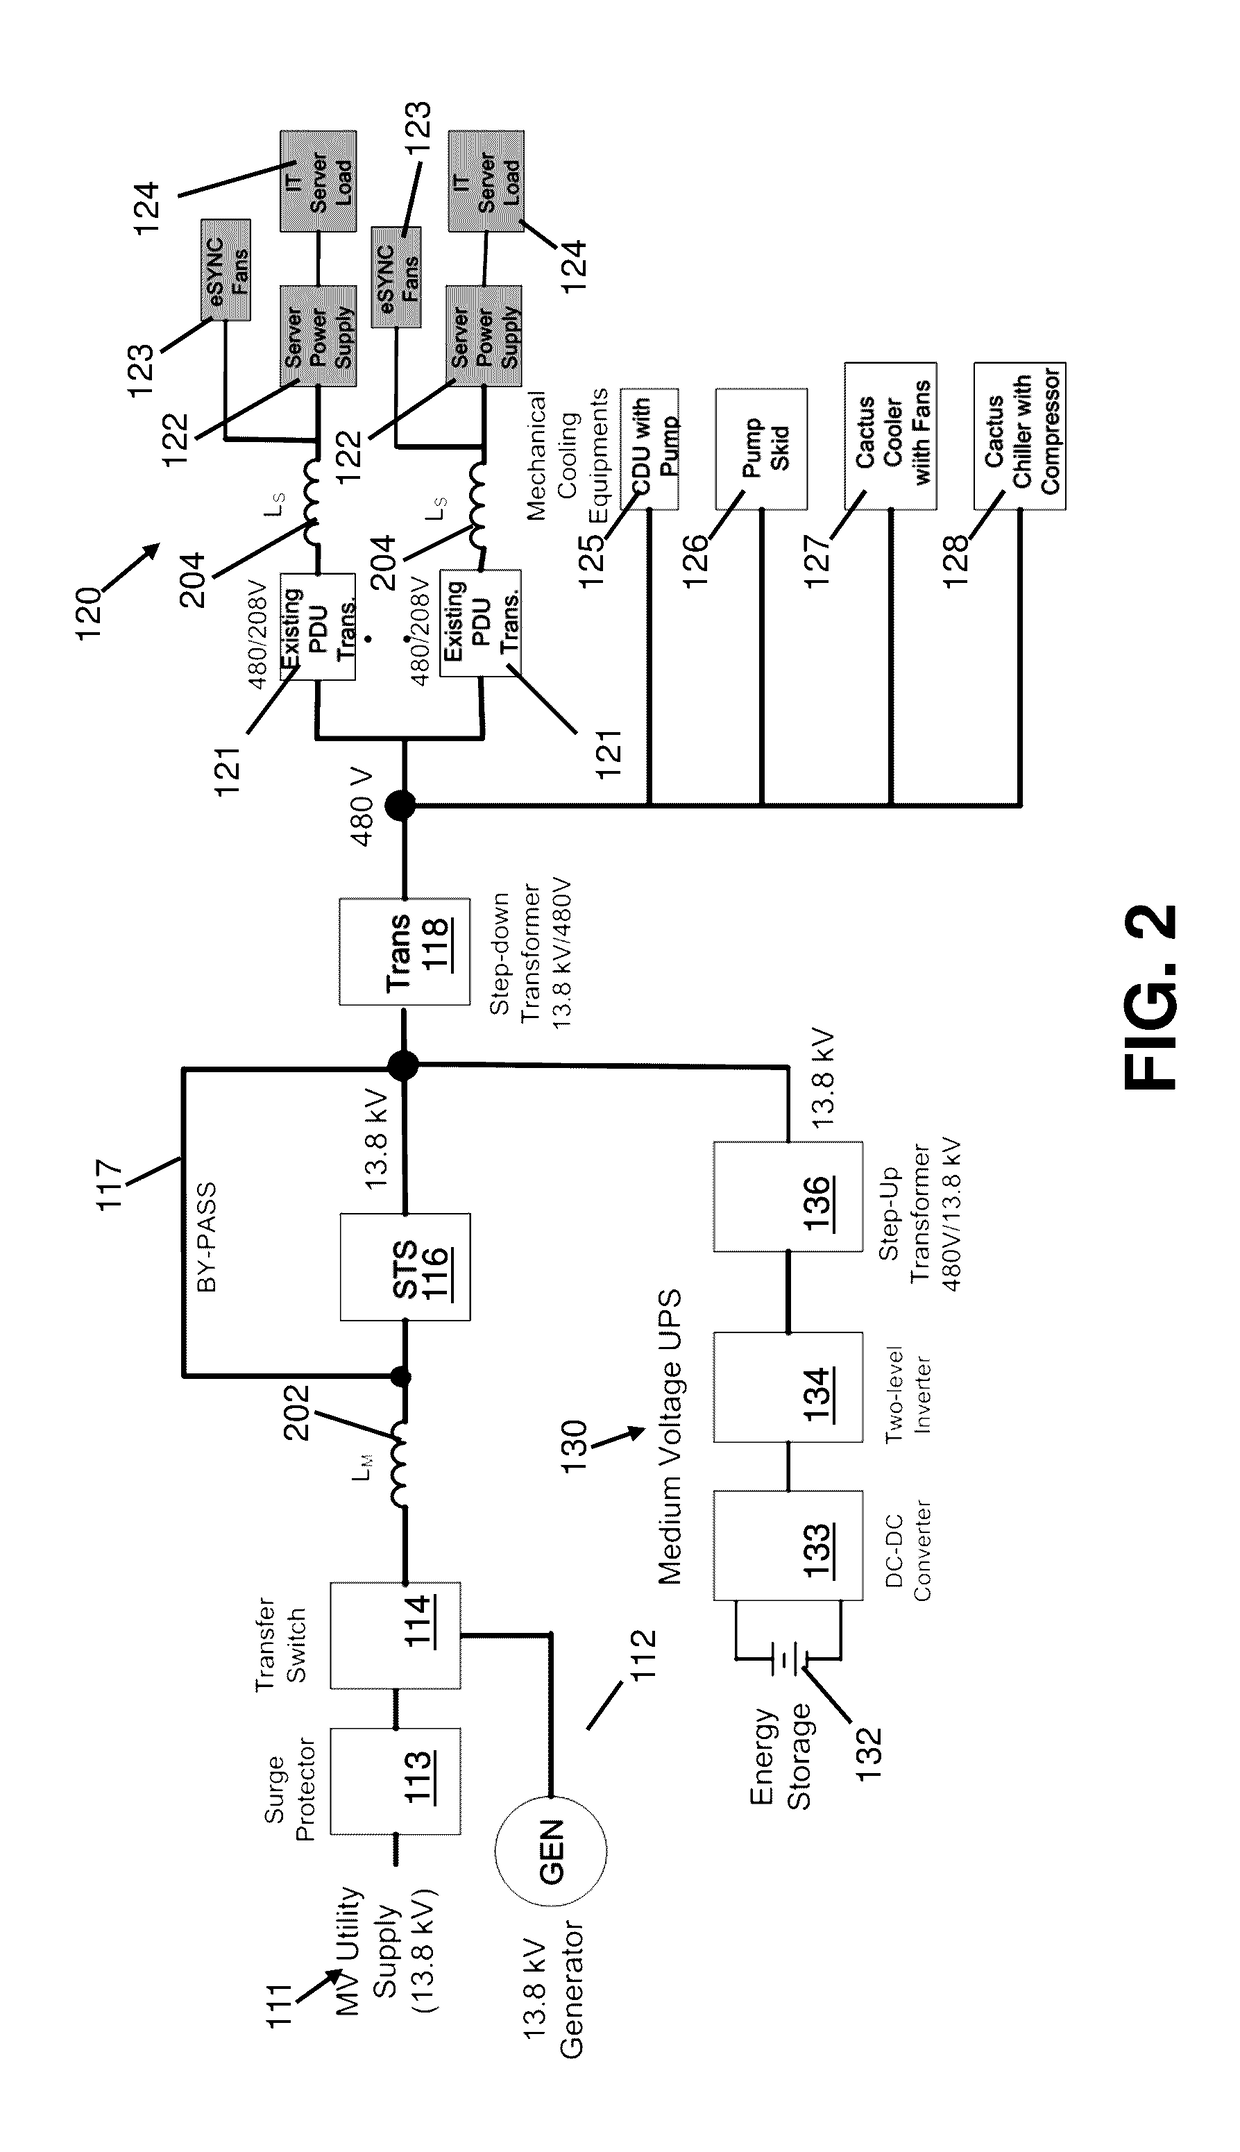 Systems and methods for mitigating harmonics in electrical systems by using active and passive filtering techniques